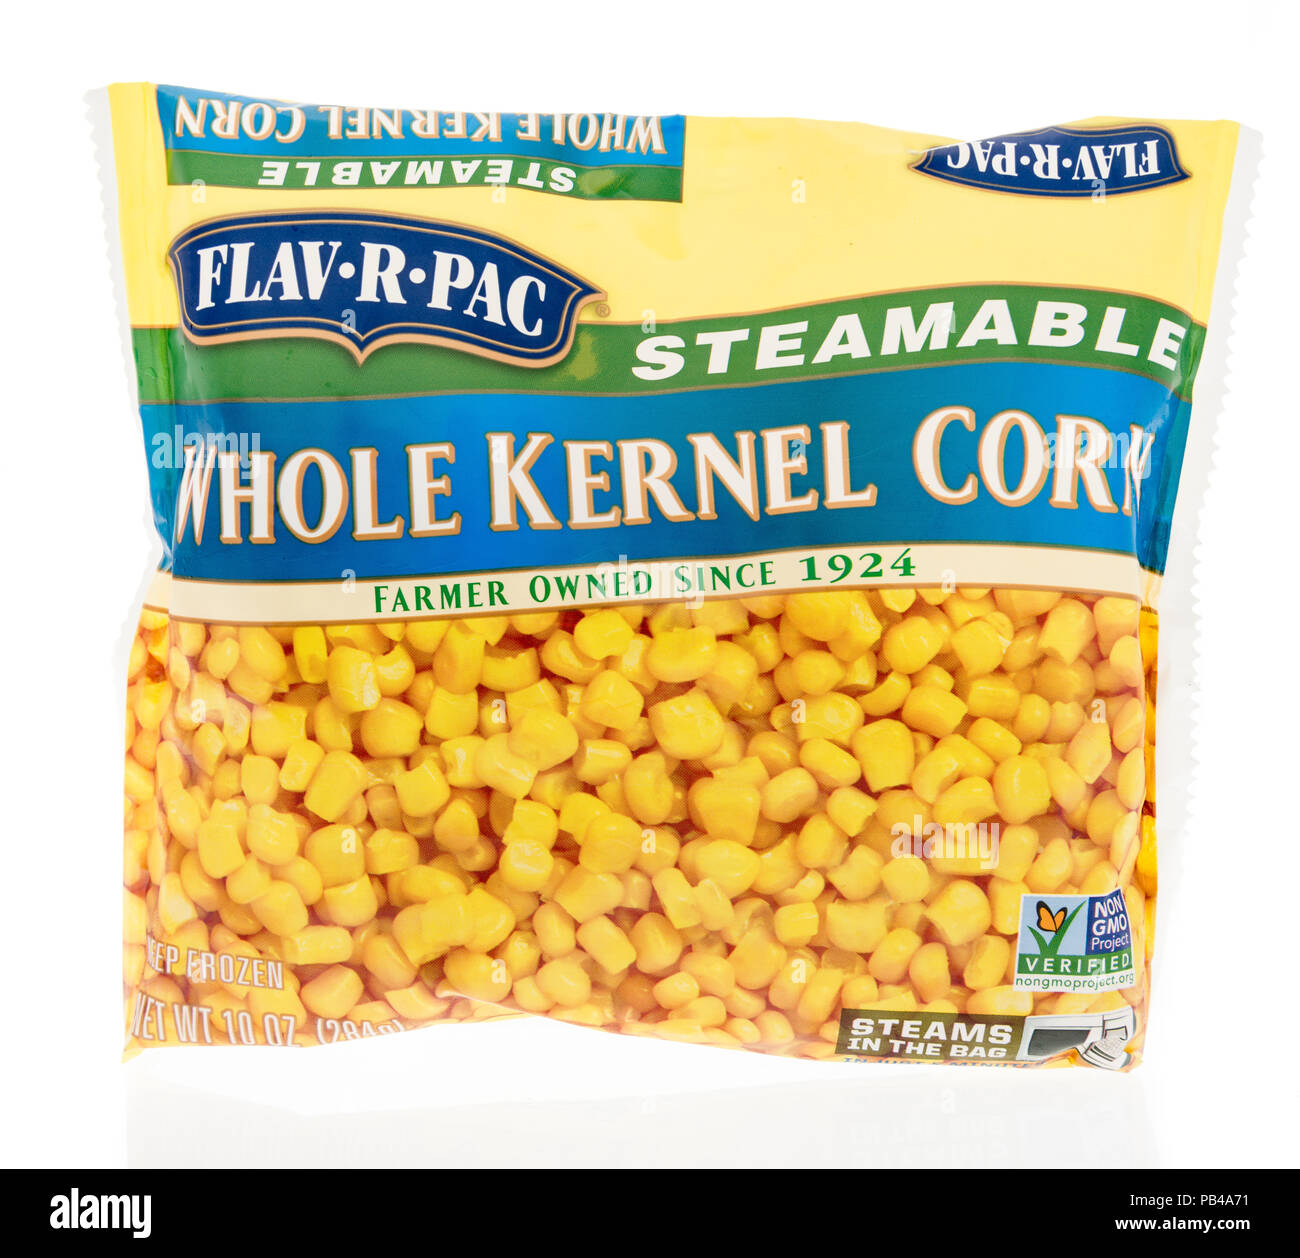 Winneconne, WI - 25 July 2018 -  A bag of Flav-r-pac steamable whole kernel corn on an isolated background. Stock Photo